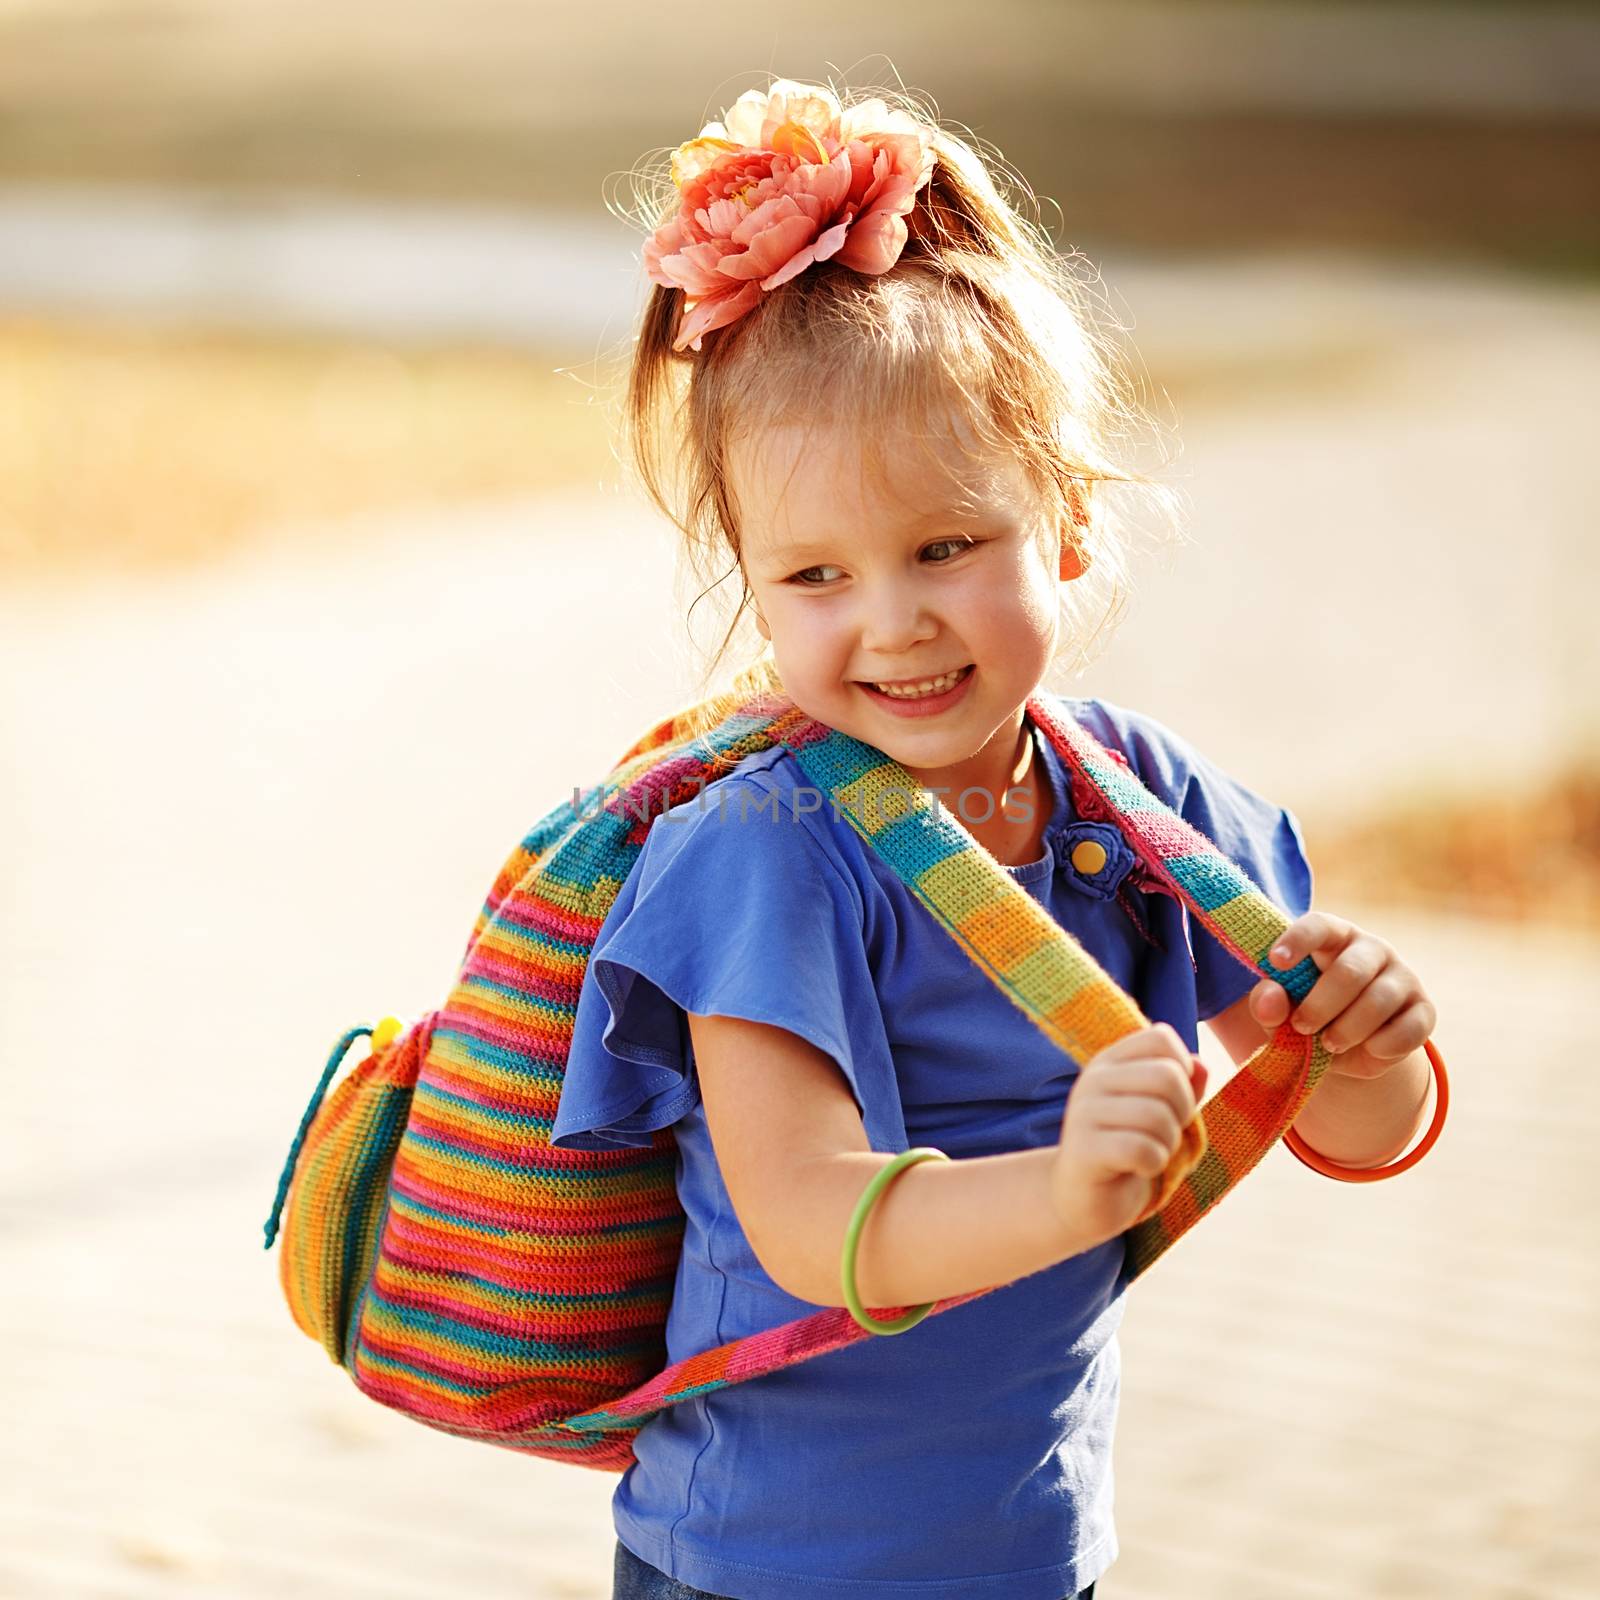 Portrait of an adorable preschool age girl with colorful knitted backpack. Preparation for school